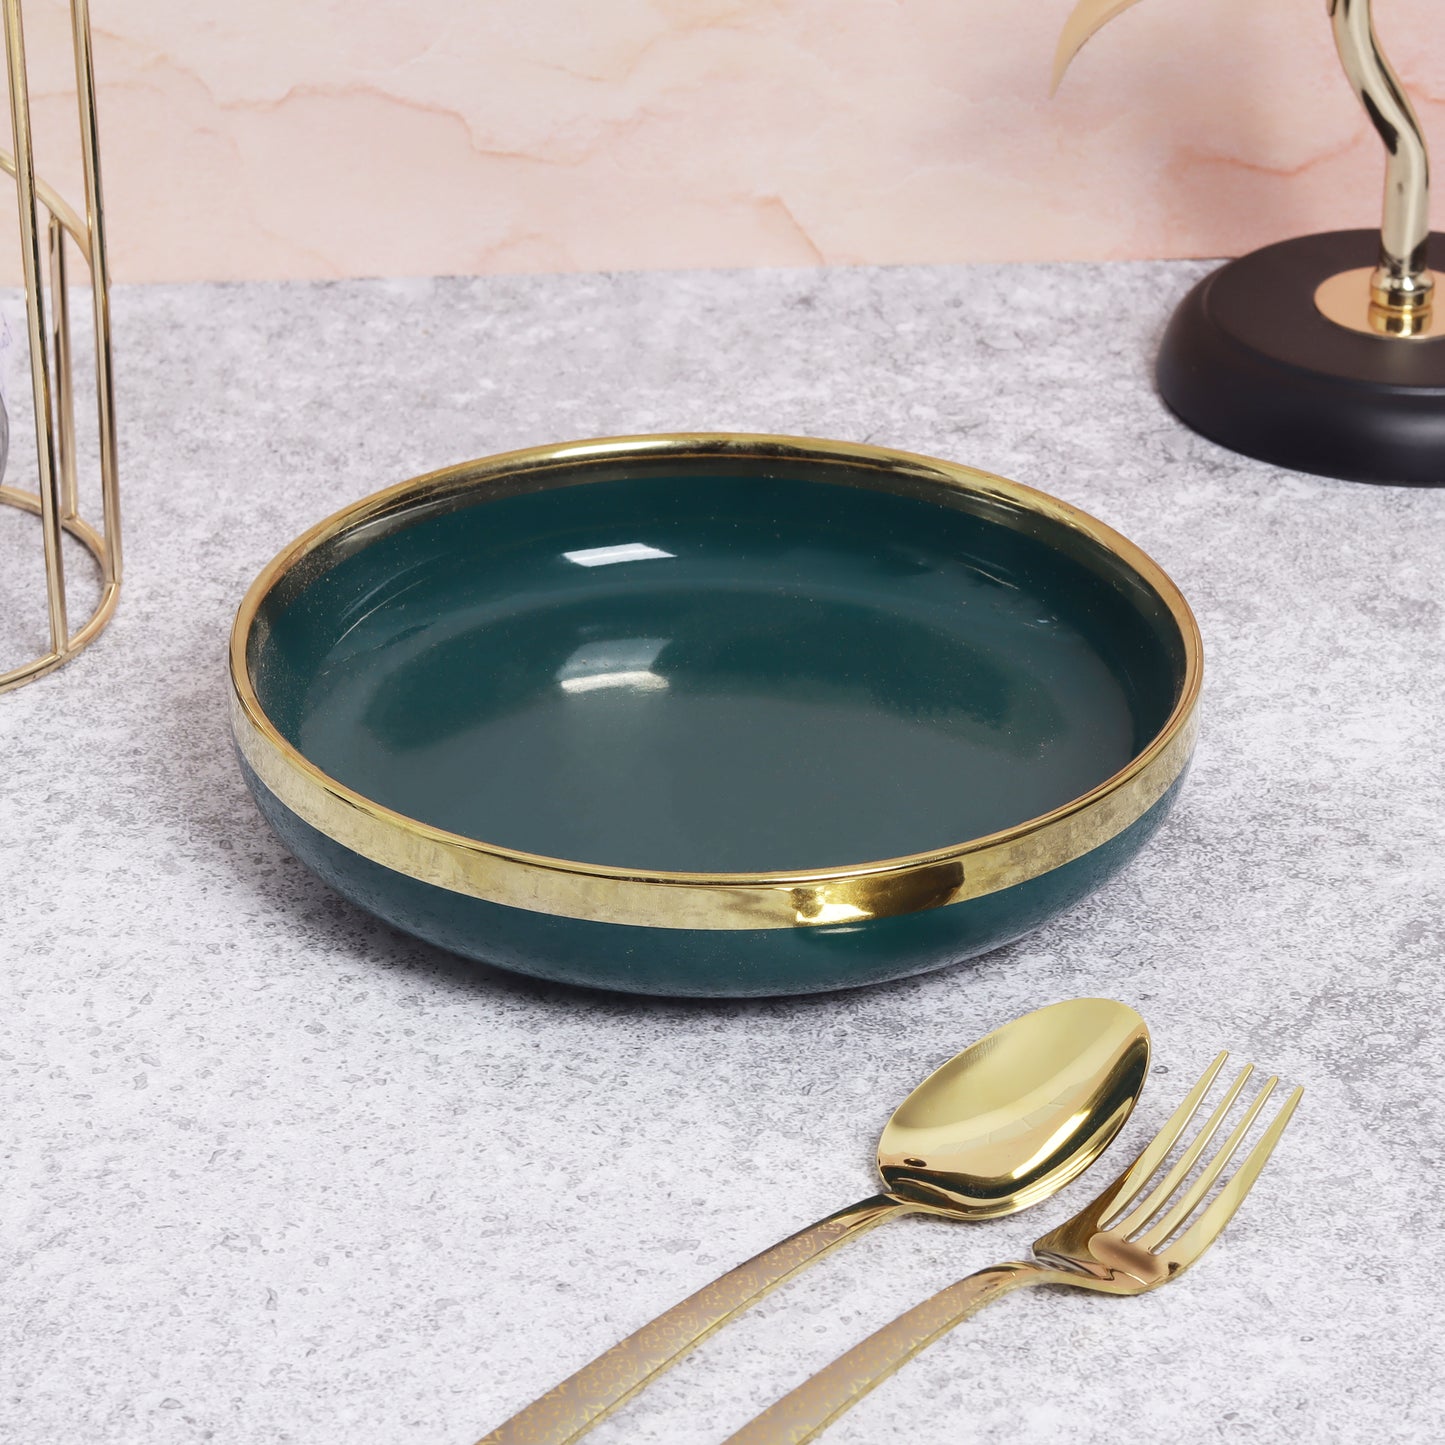 Personalized 10-piece ceramic dinner set - elevate dining with your unique touch